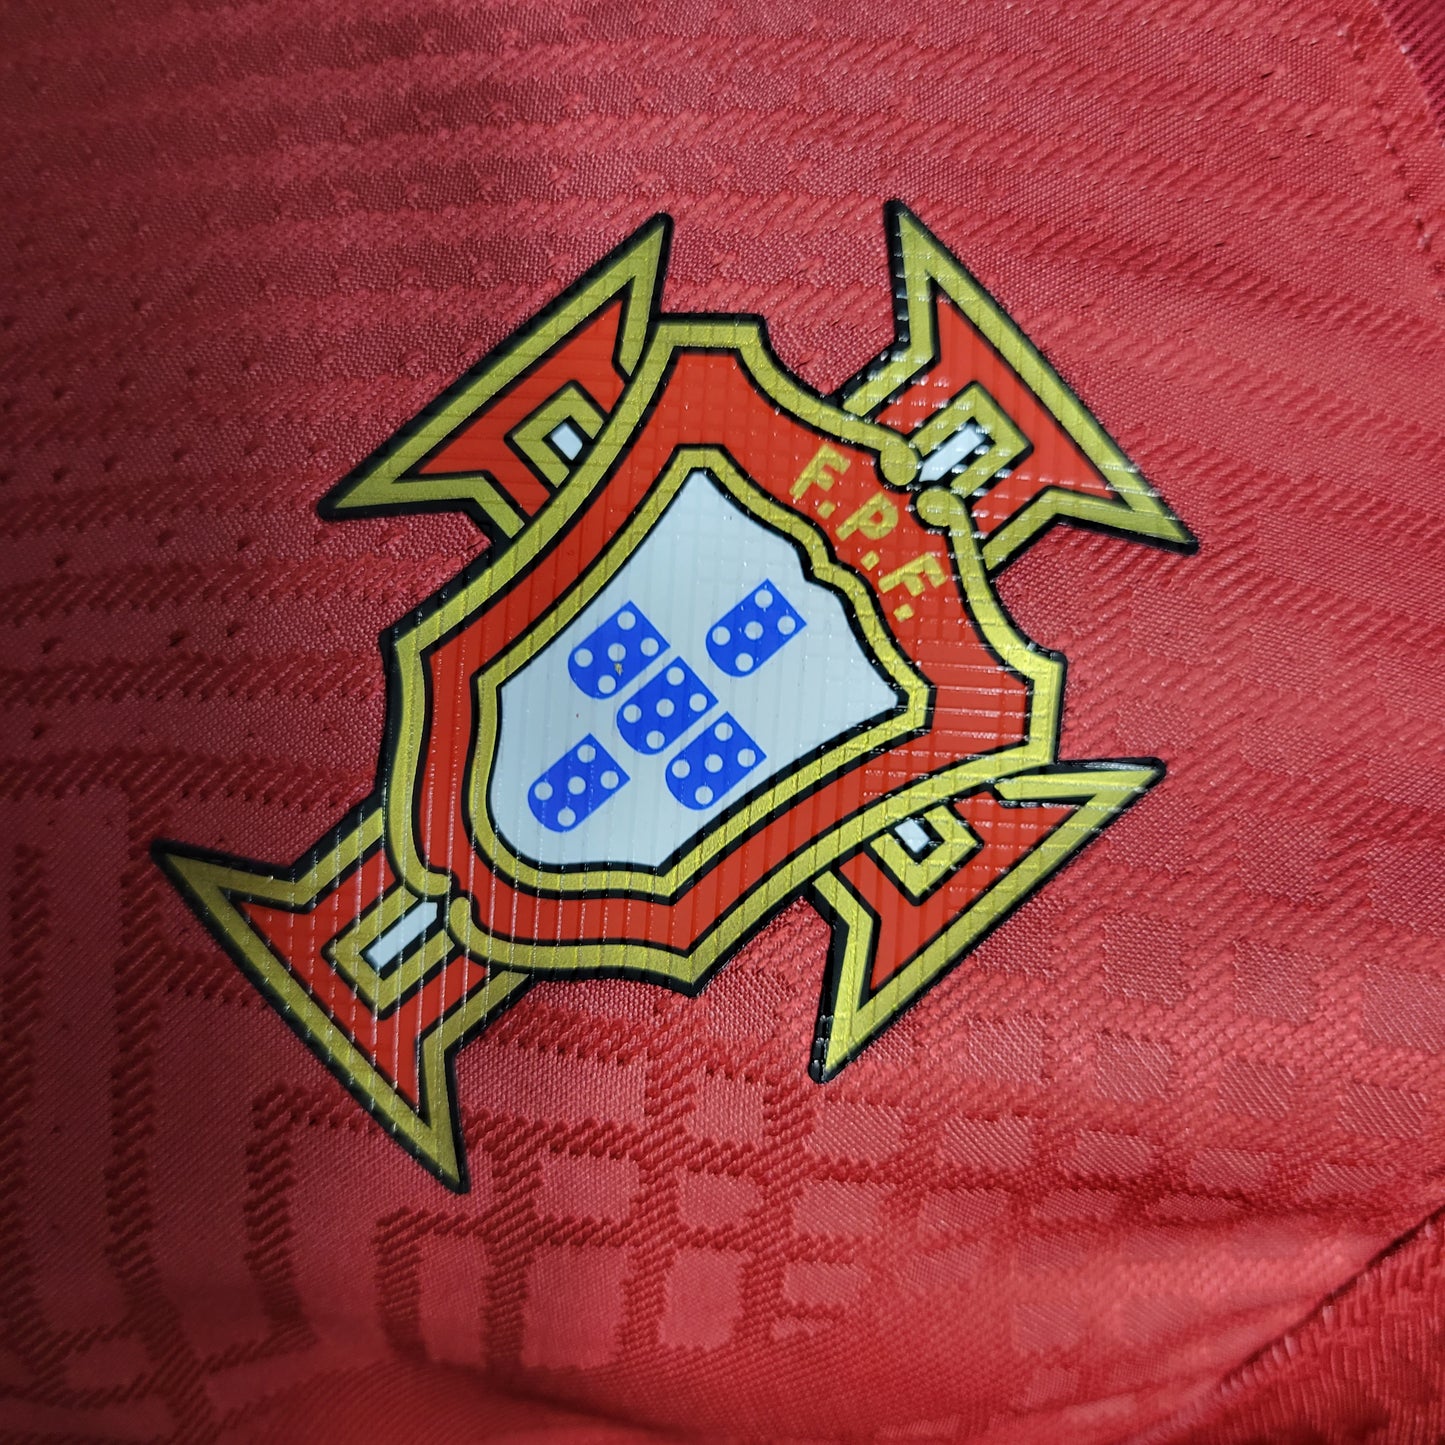 22-23 Player Portugal Home